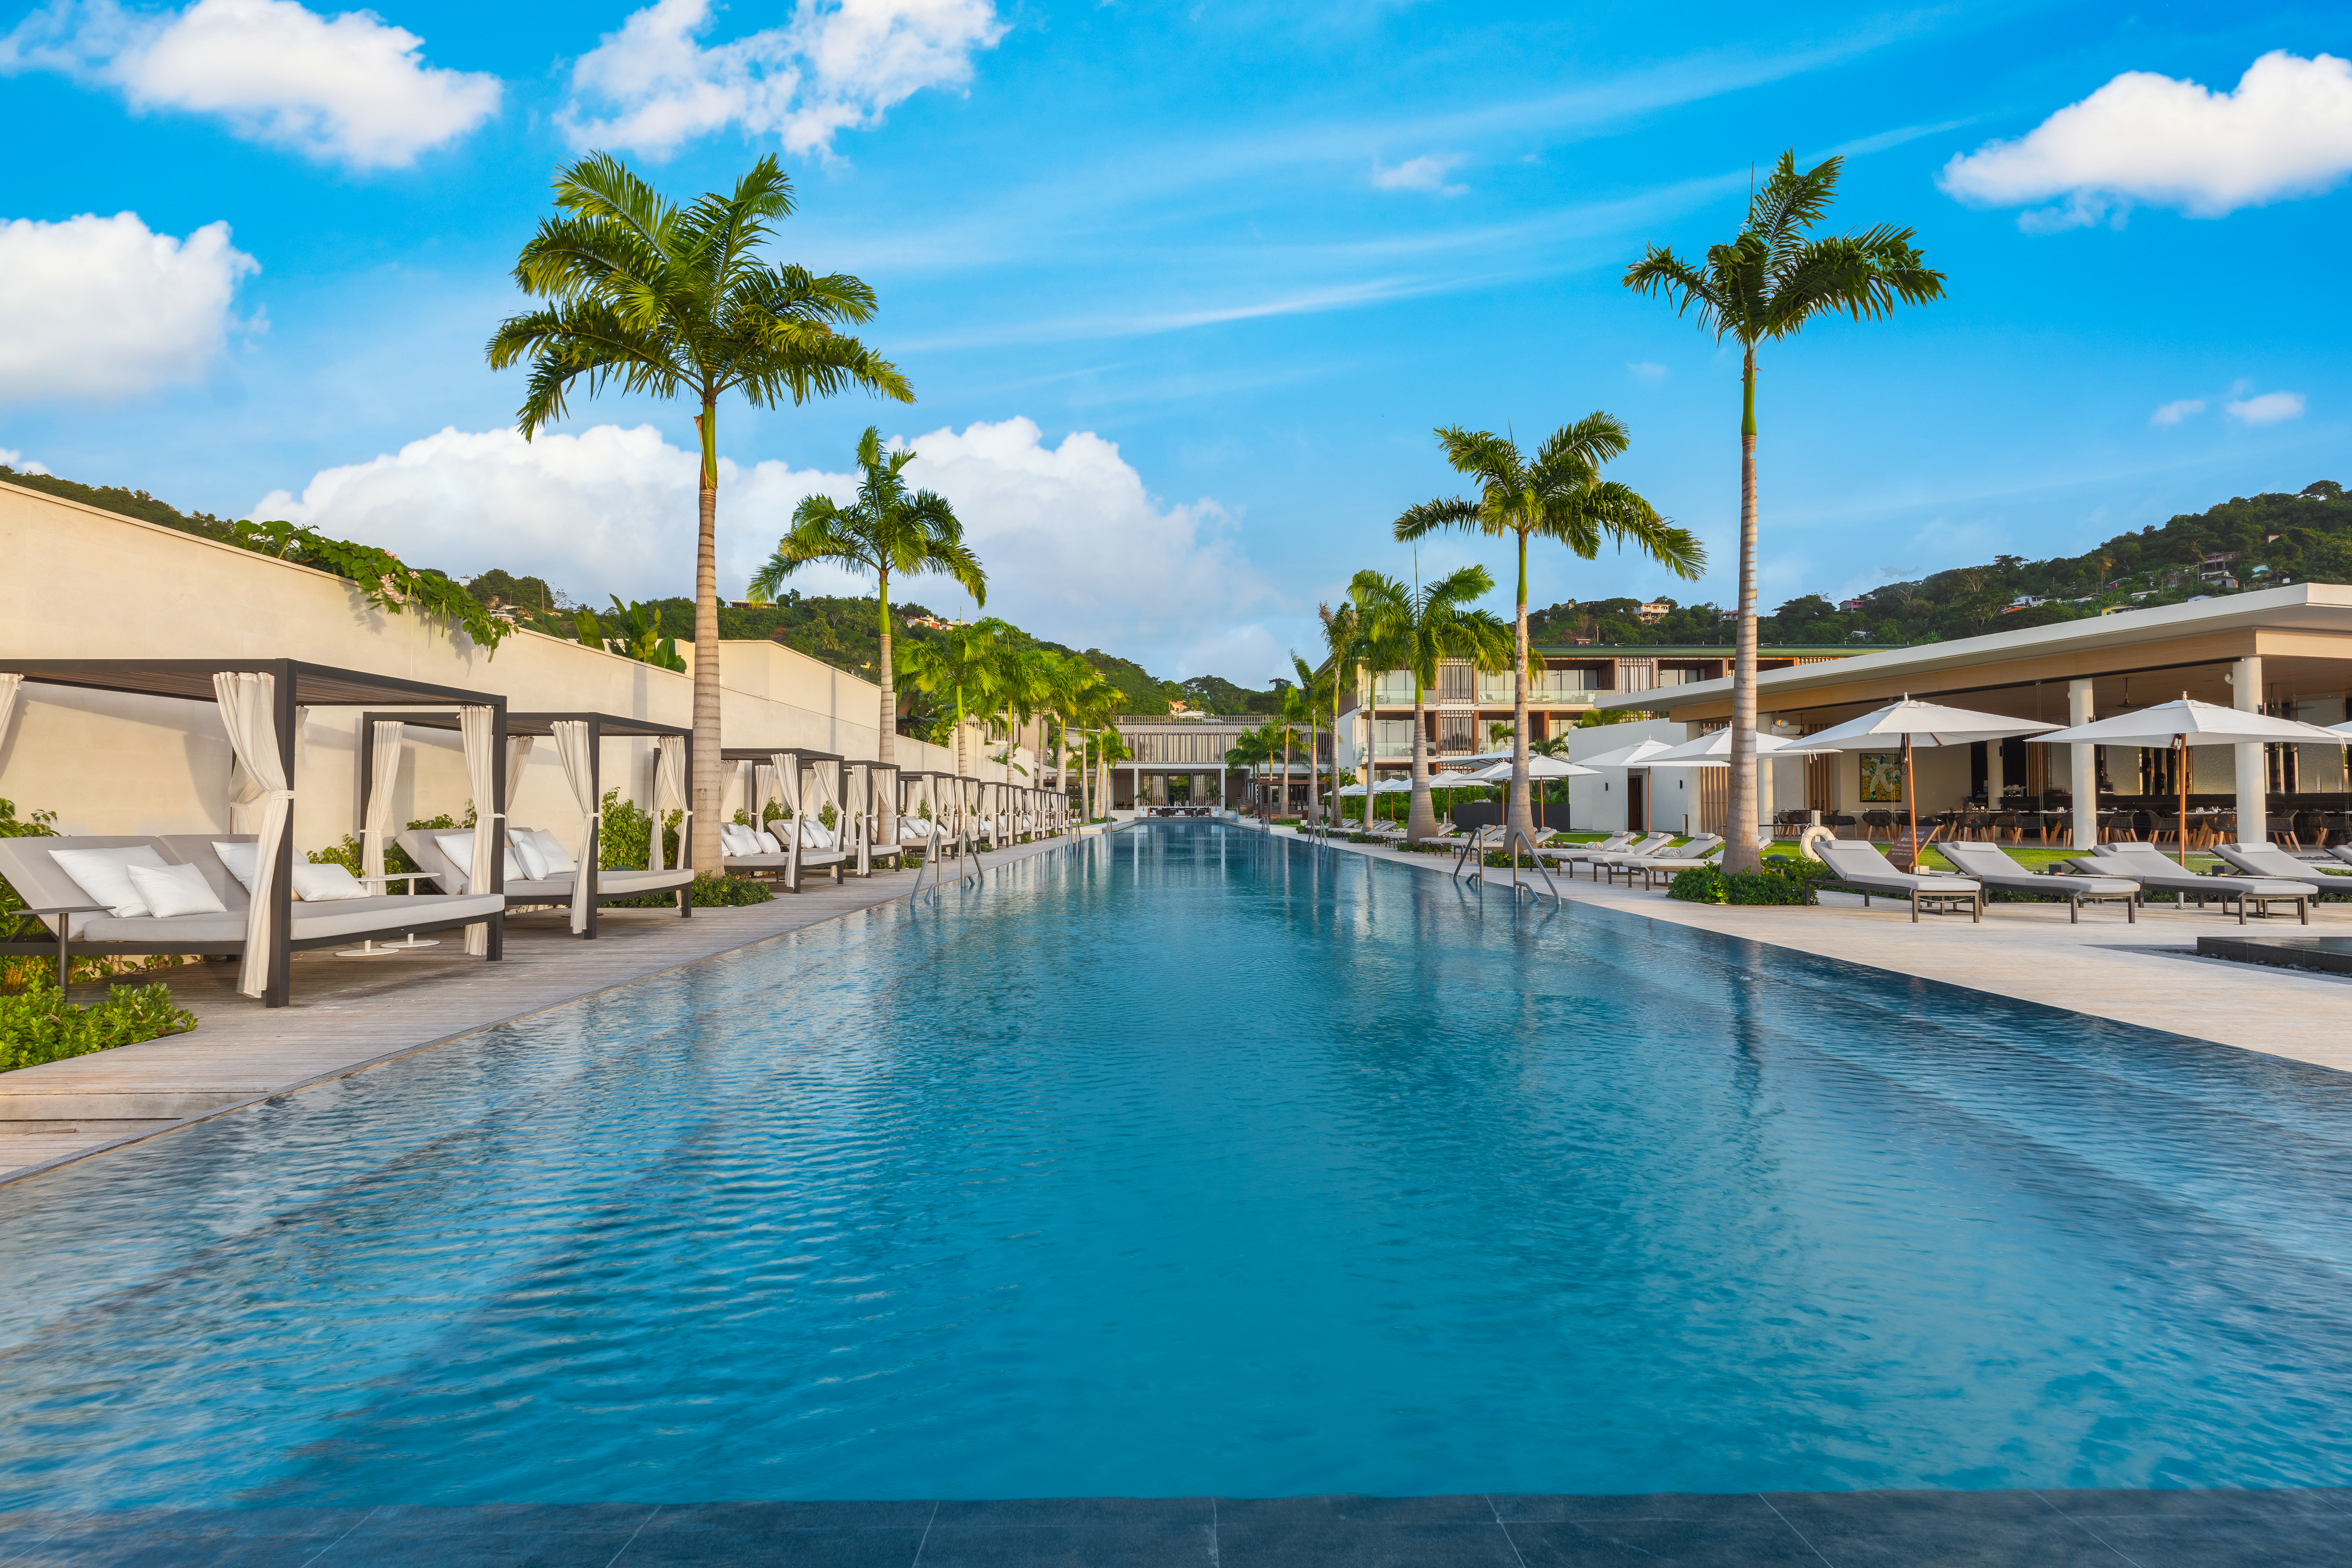 Those hoping for a warm winter getaway may want to jump on the Winter Early Birds special offered by Silversands Grenada, where a 100-meter infinity pool leads to Grand Anse Beach.